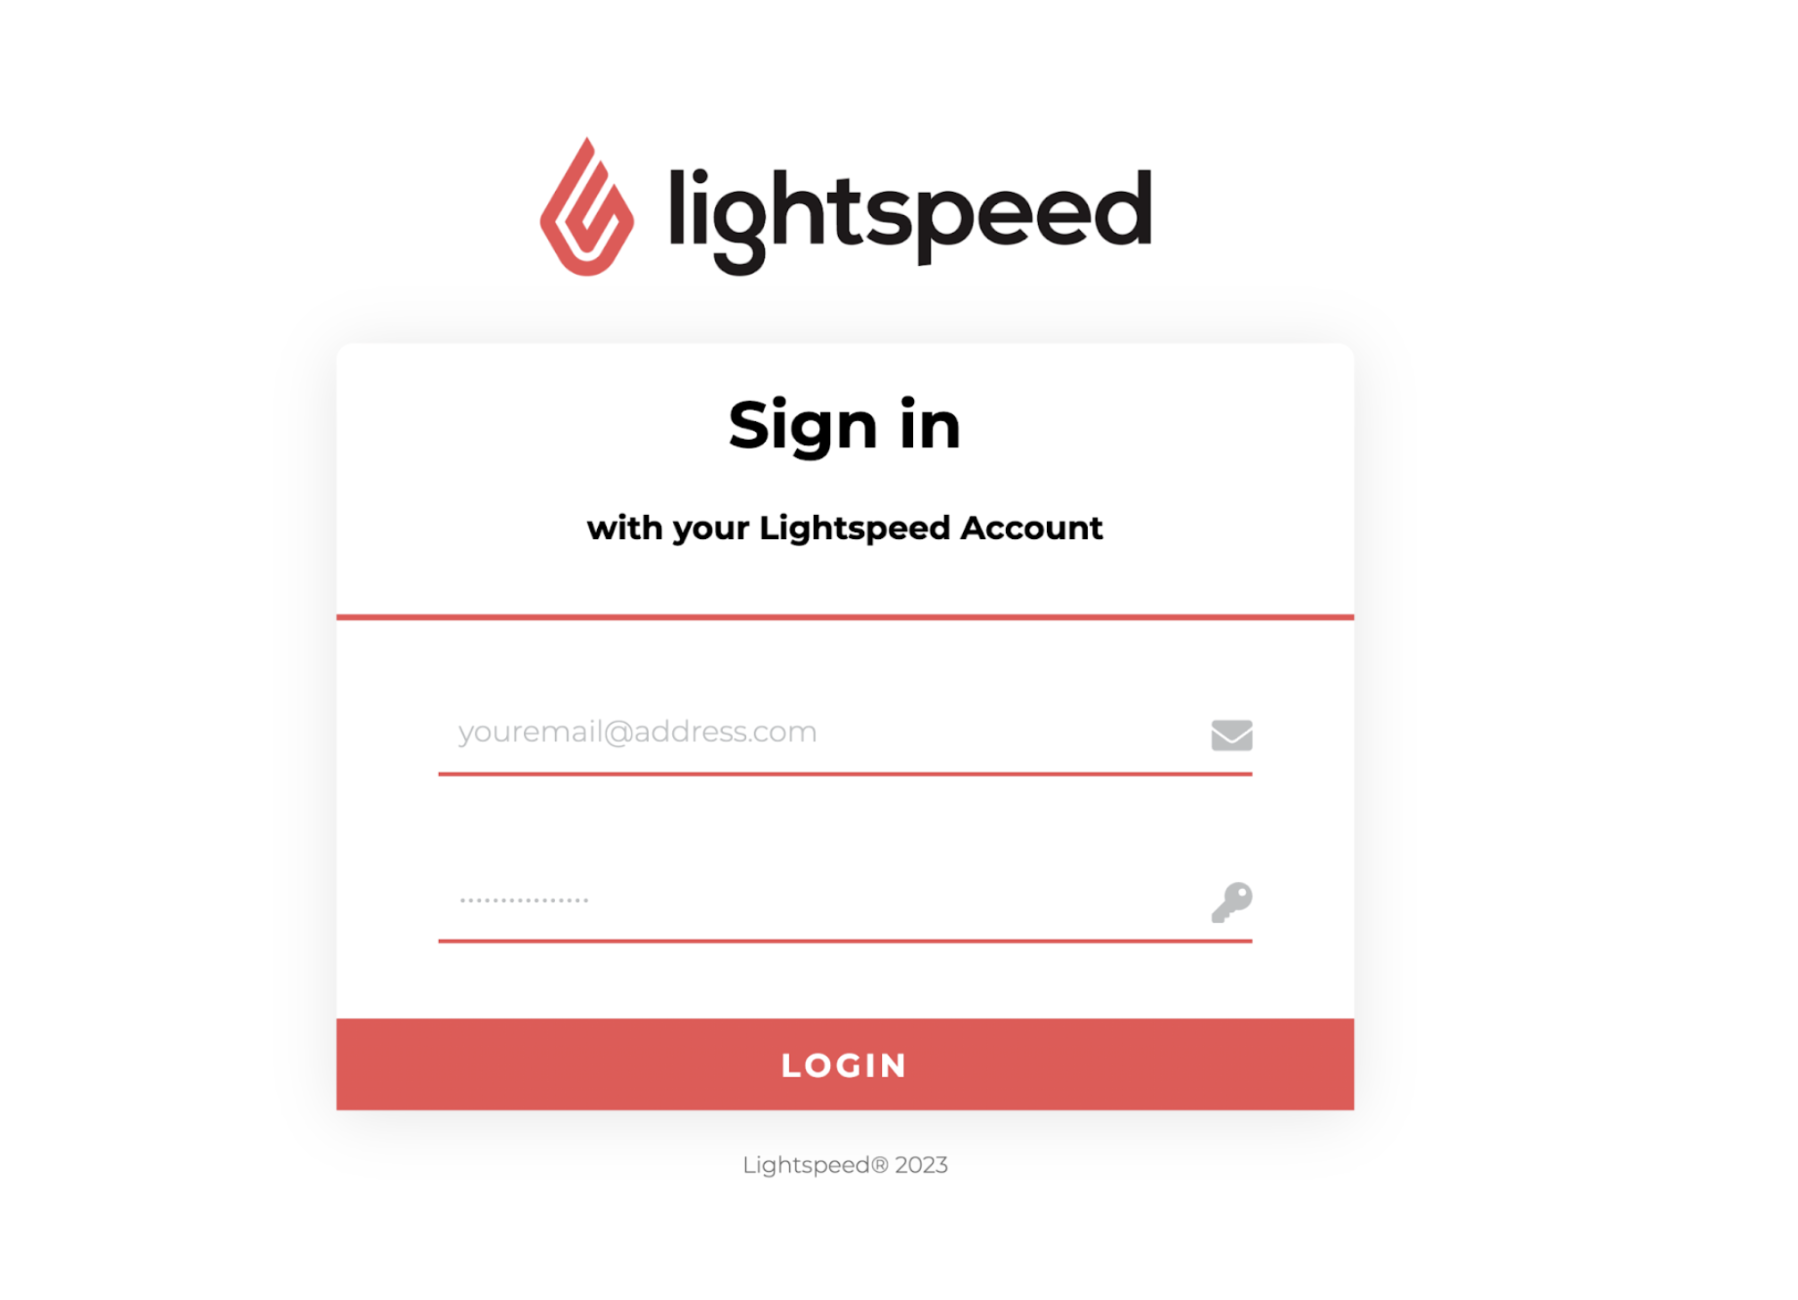 Lightspeed sign in page with email and password fields